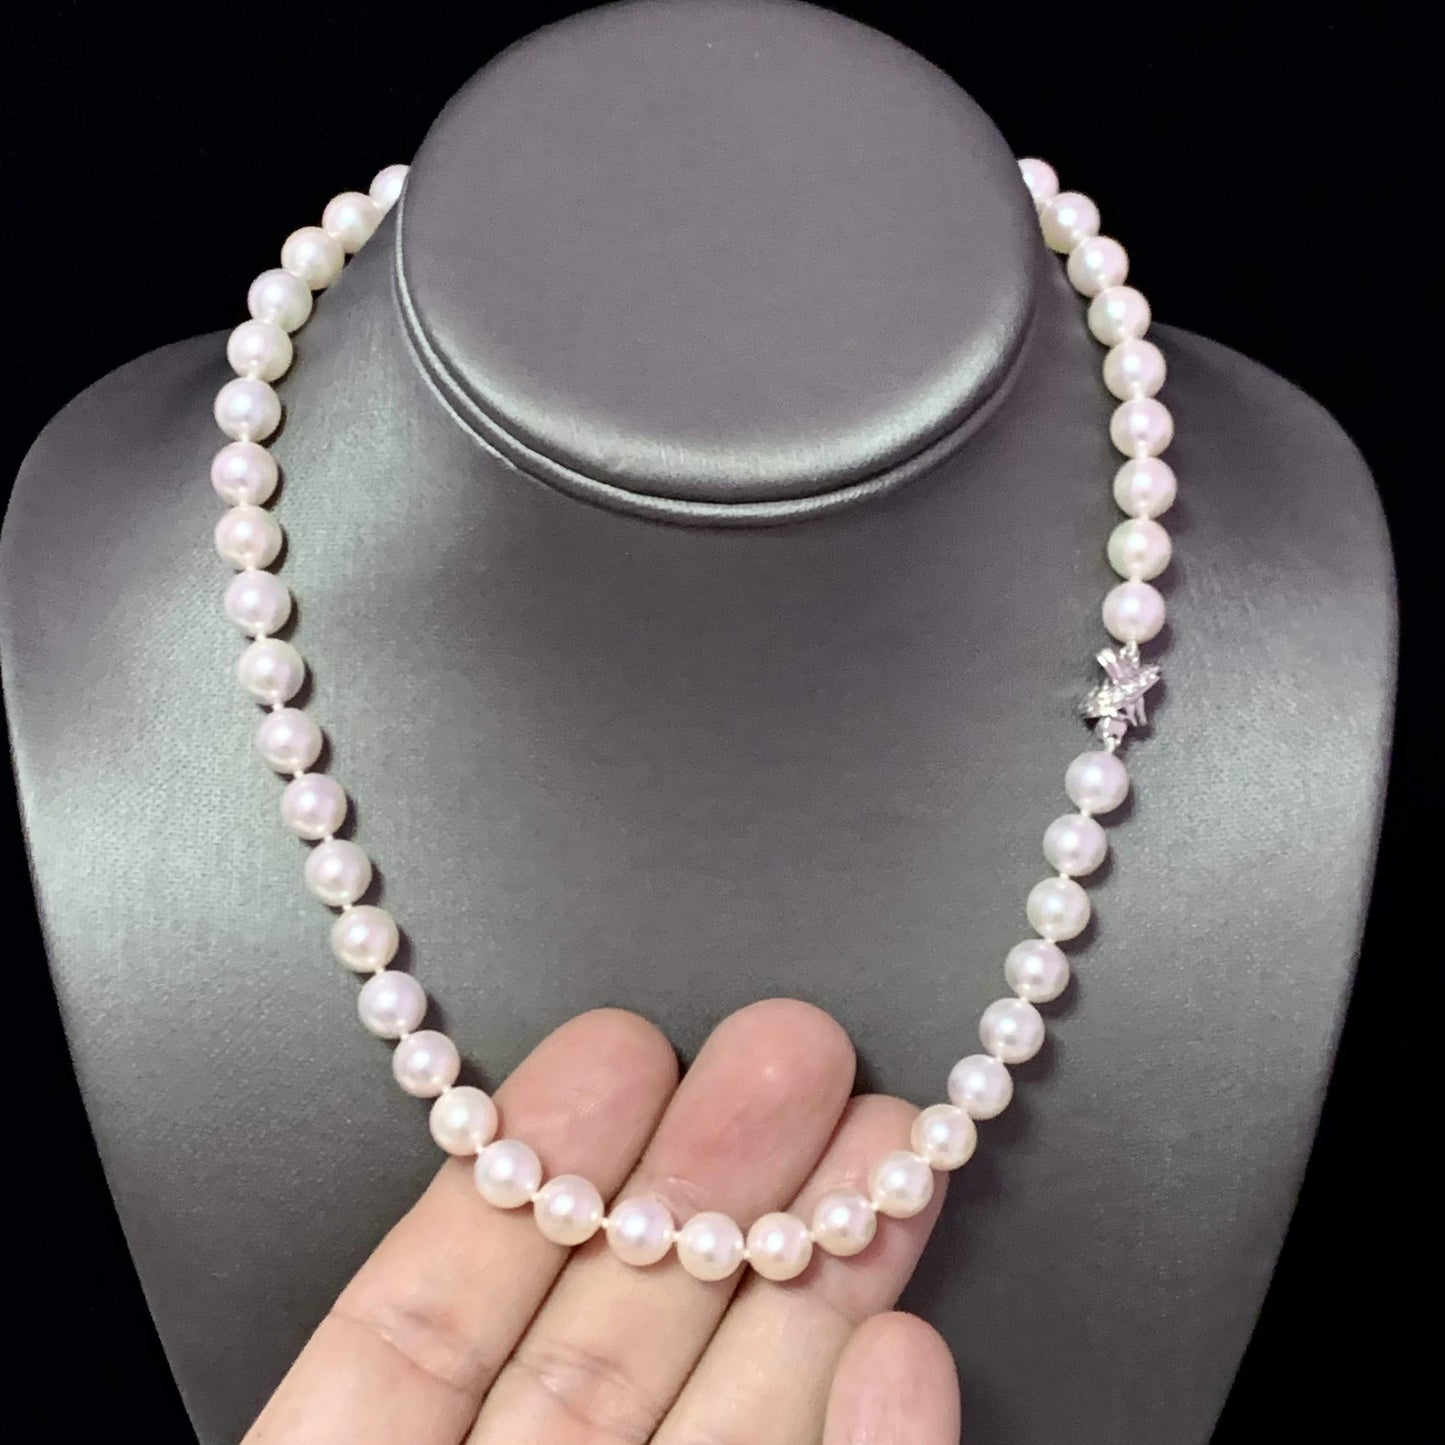 Akoya Pearl Necklace 14k White Gold 17" 8.5 mm Certified $4,990 114458 - Certified Estate Jewelry